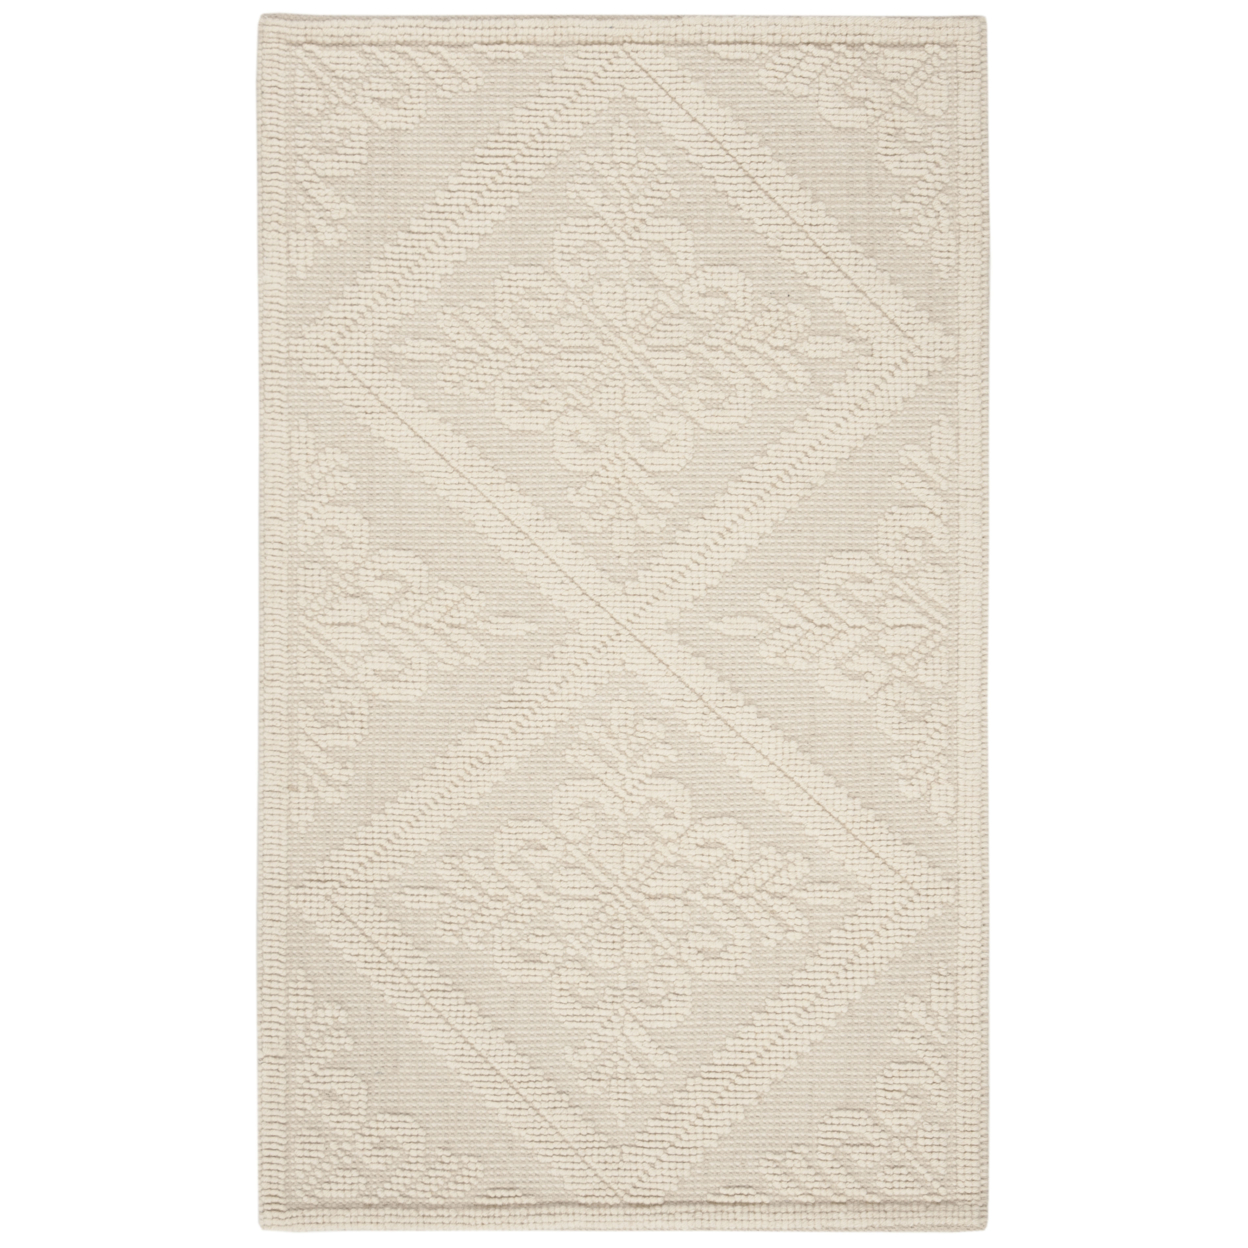 SAFAVIEH Vermont Collection VRM306A Handwoven Ivory Rug - 2-3 X 8